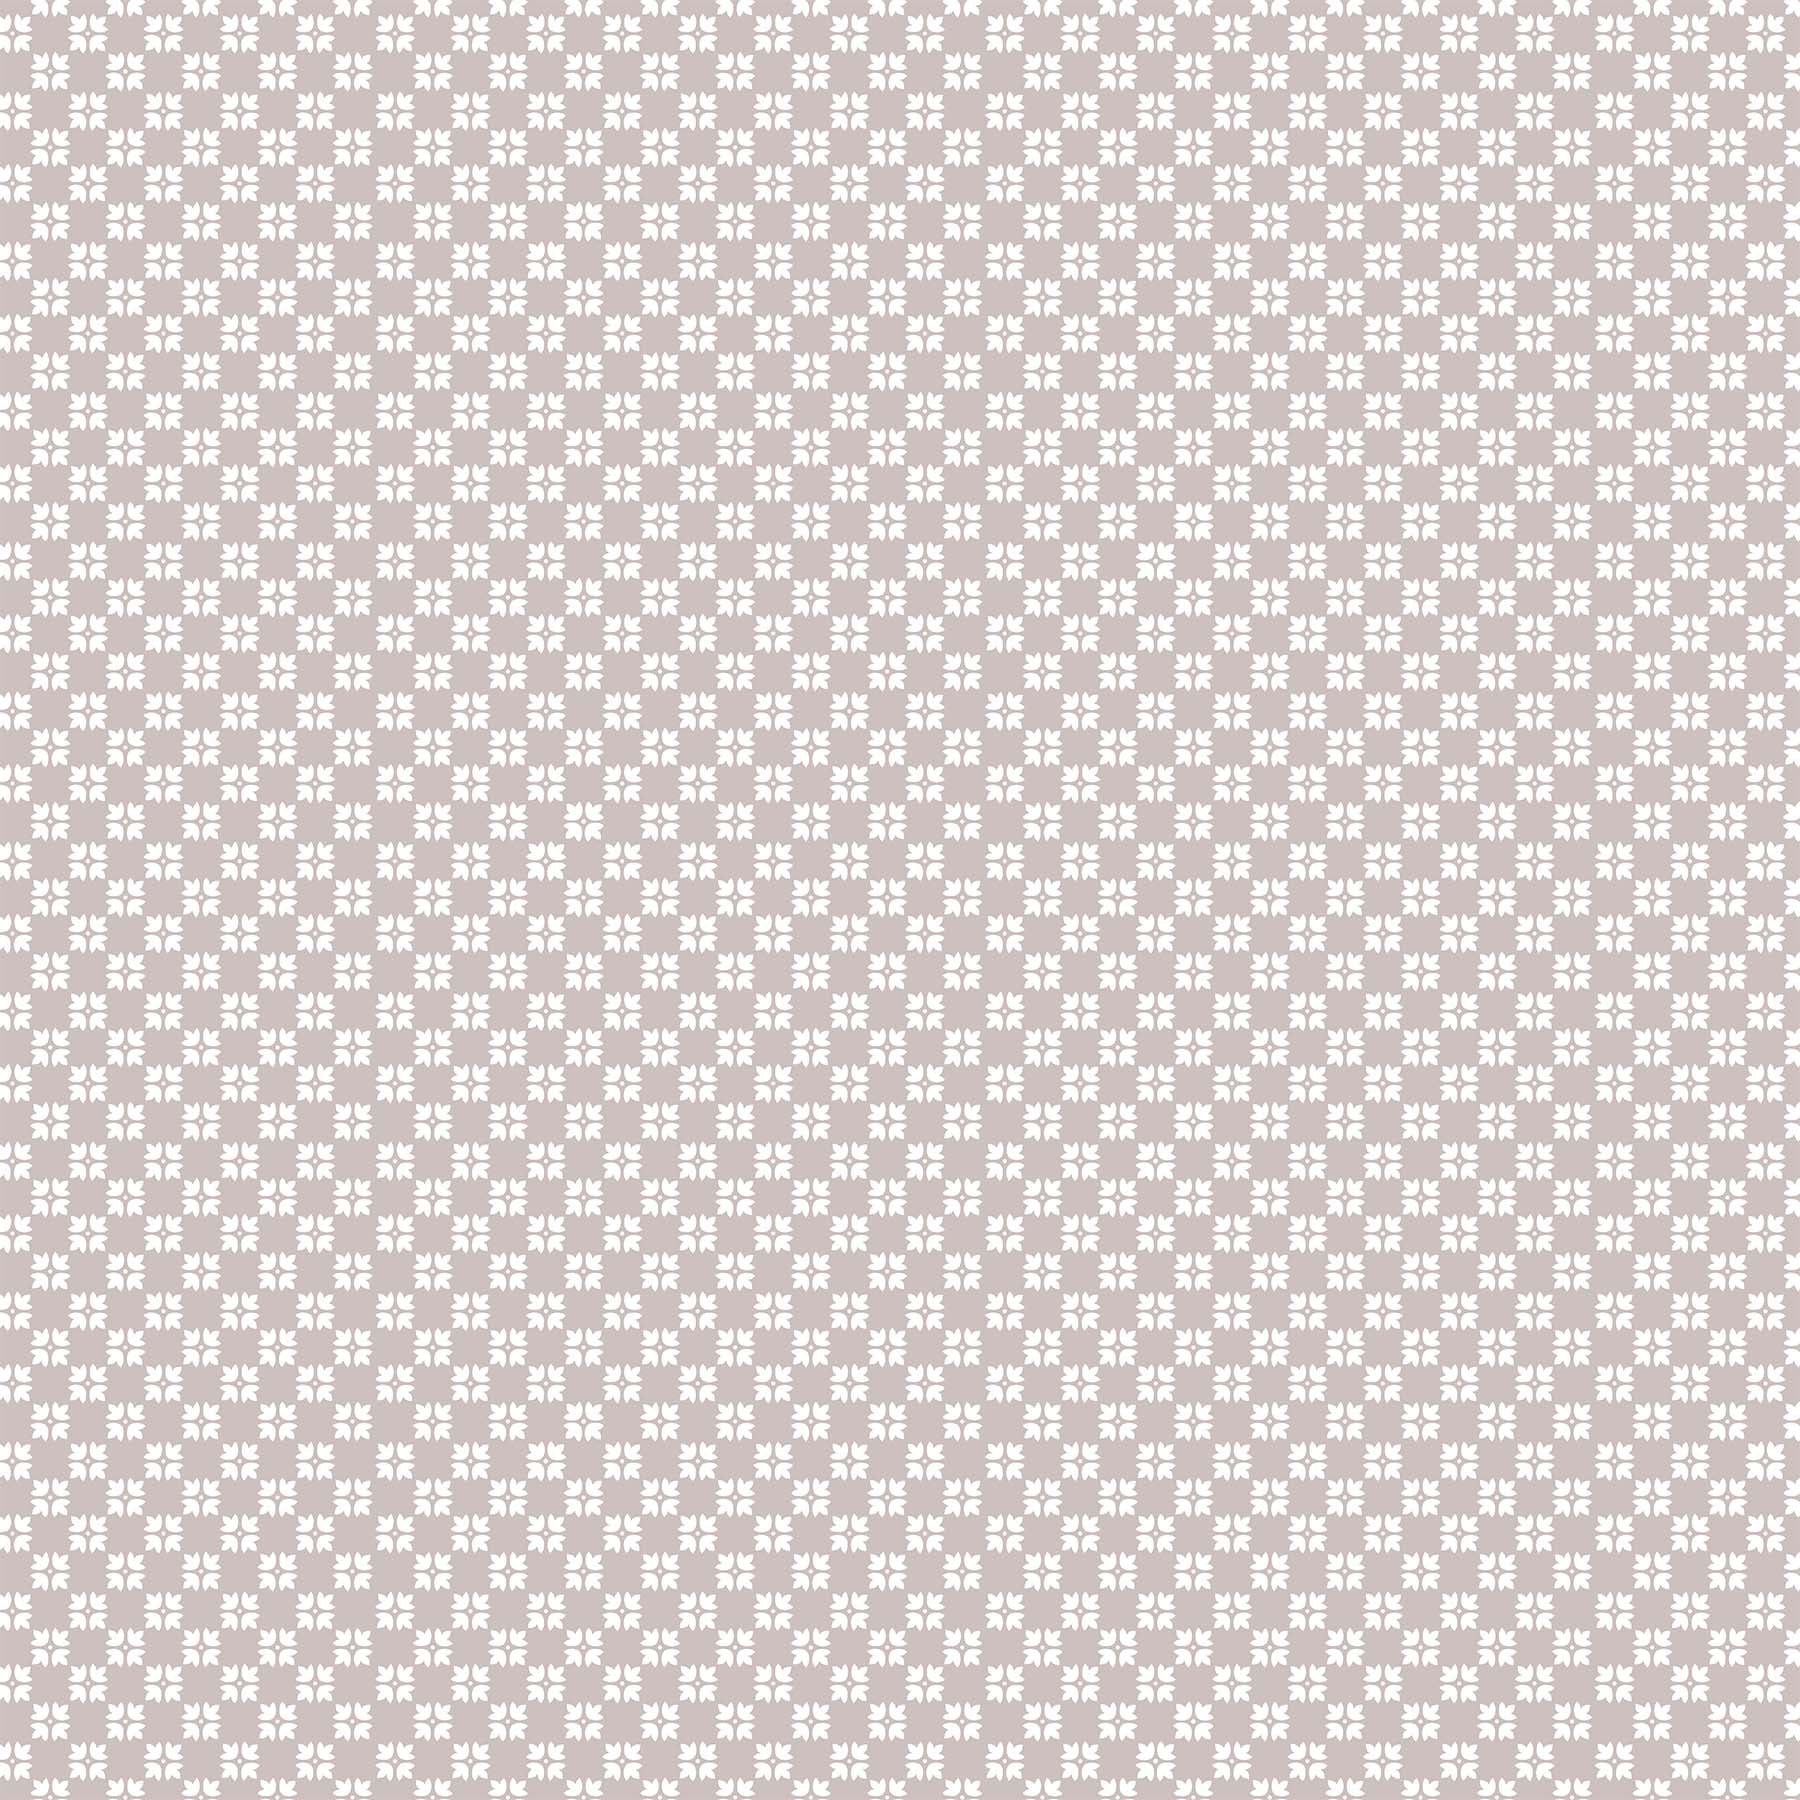 Hampton Court Quilt Fabric - Patterned Check in Clay Gray - 90591-14